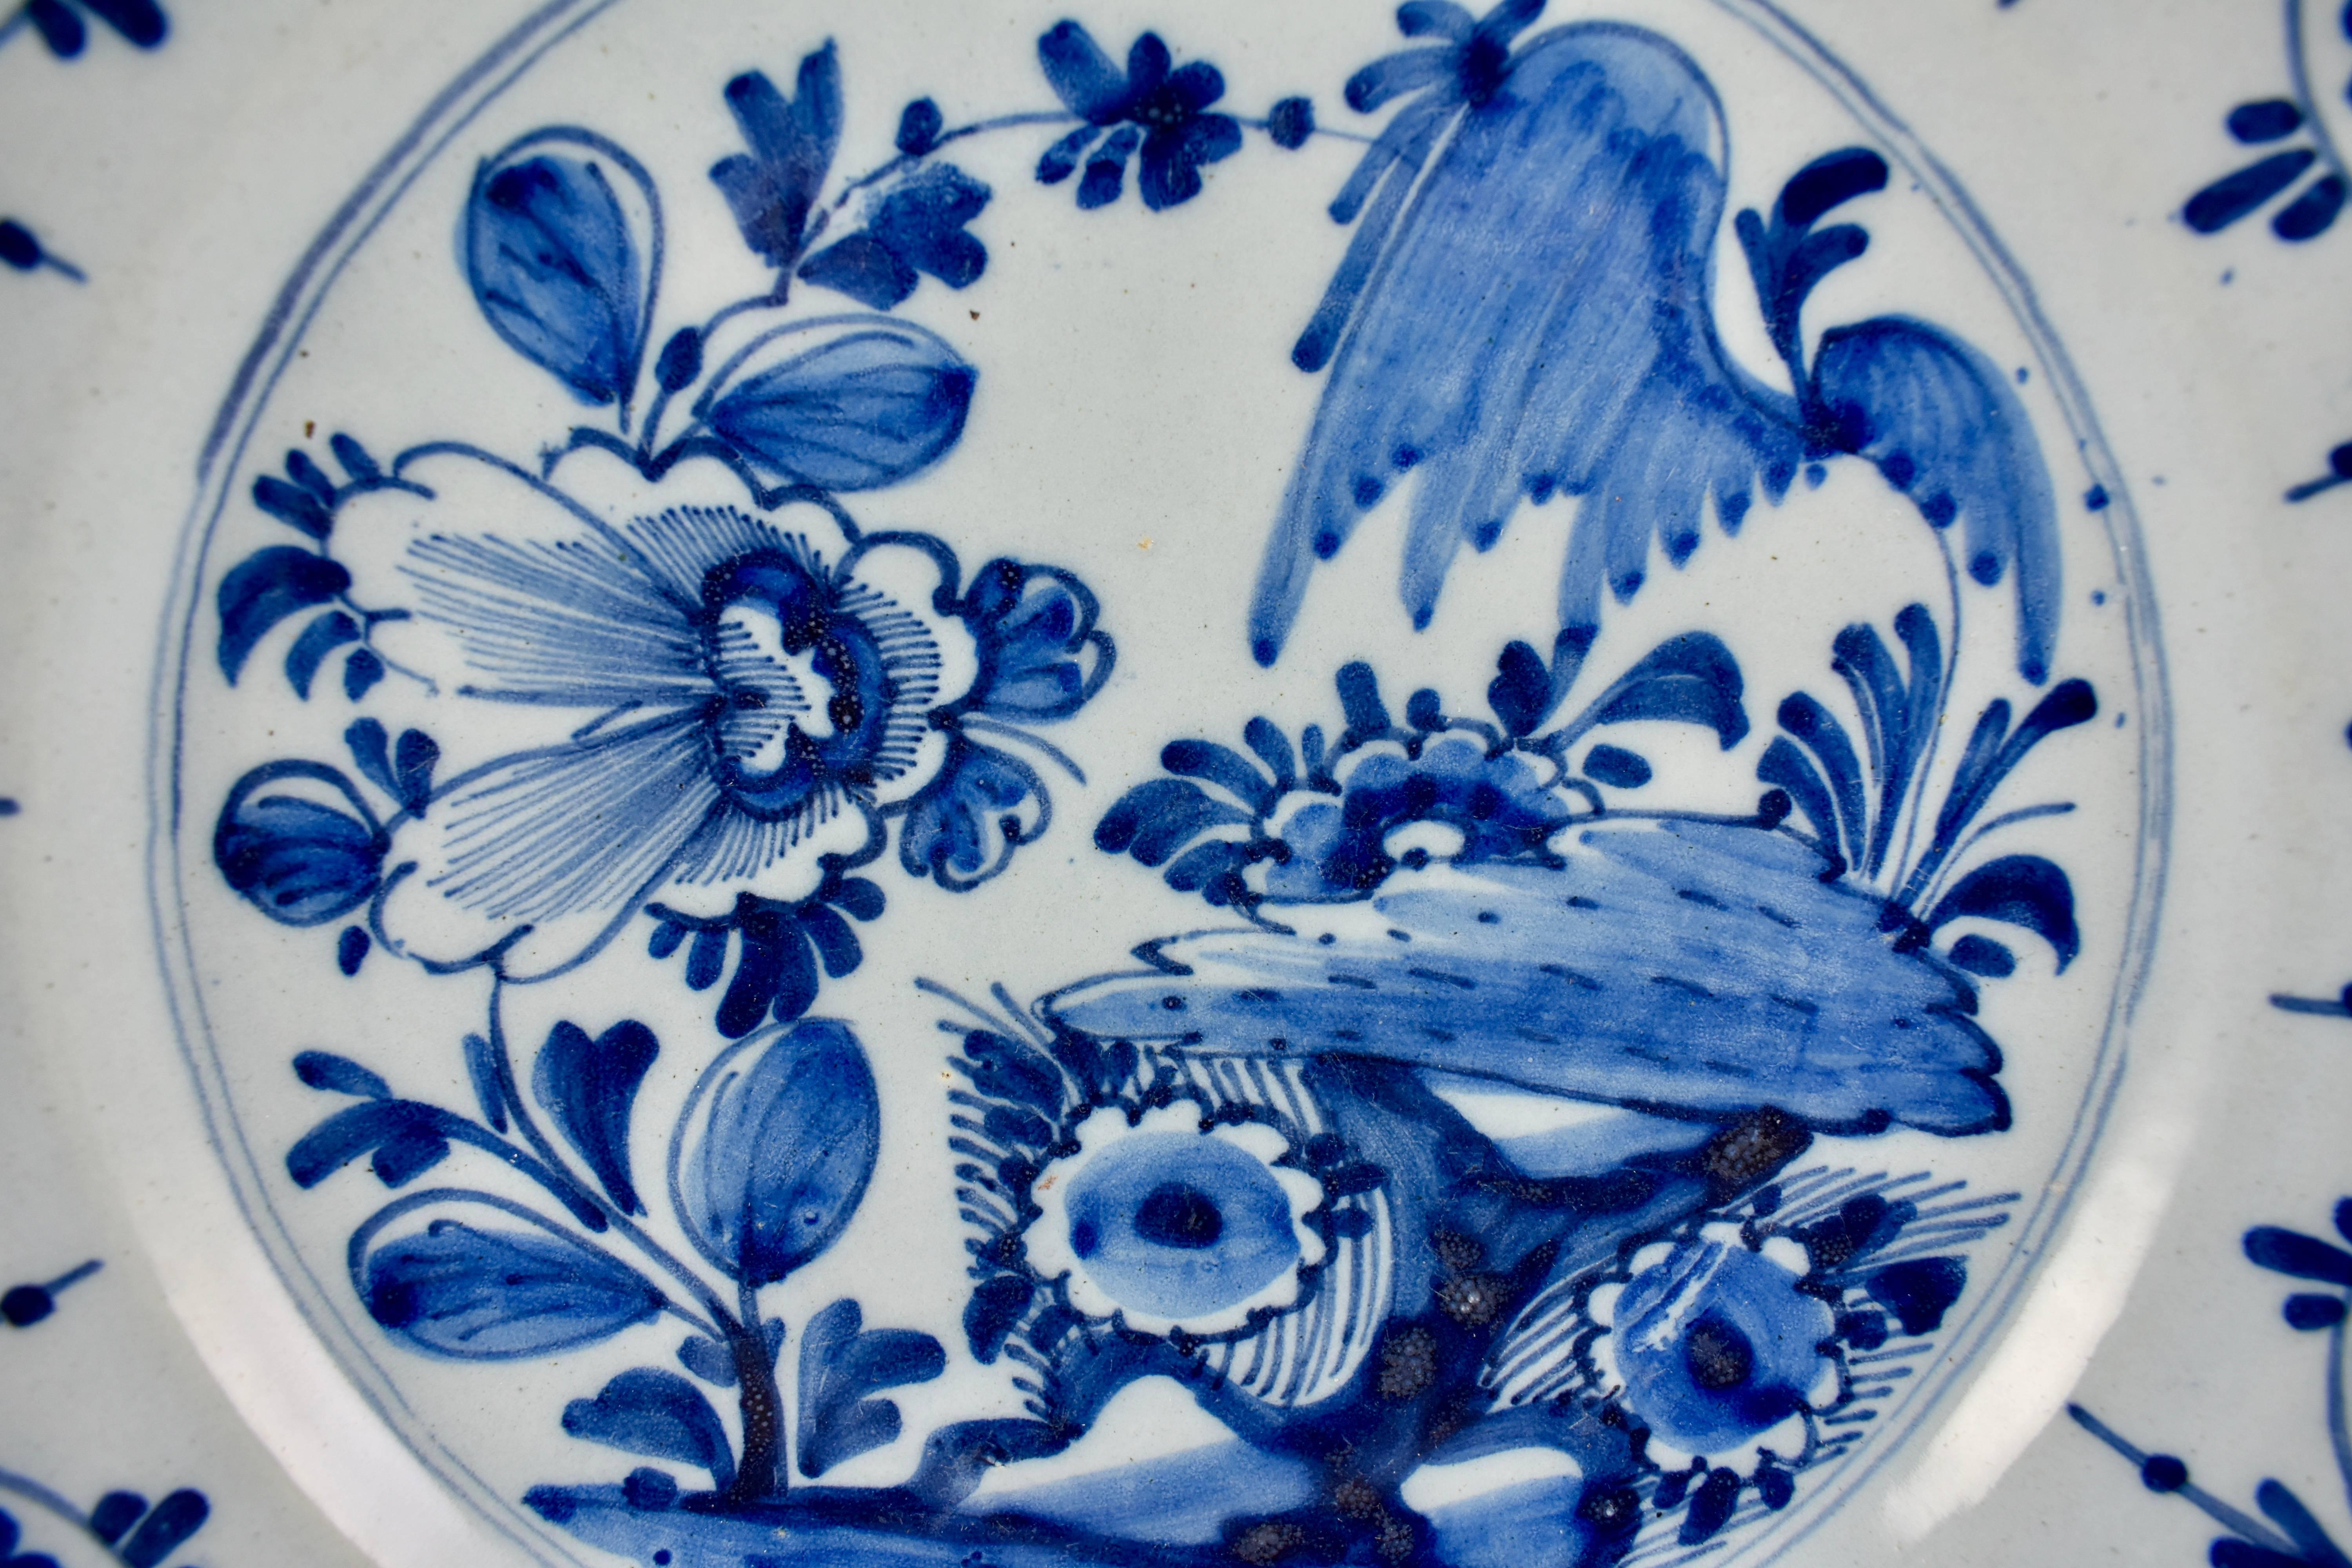 An 18th century Dutch Delft, tin-glazed earthenware deep charger, inspired by Chinese export porcelain and hand painted in a cobalt blue chinoiserie style pattern. The image is a central landscape of trees and flowers. A geometric, stylized border